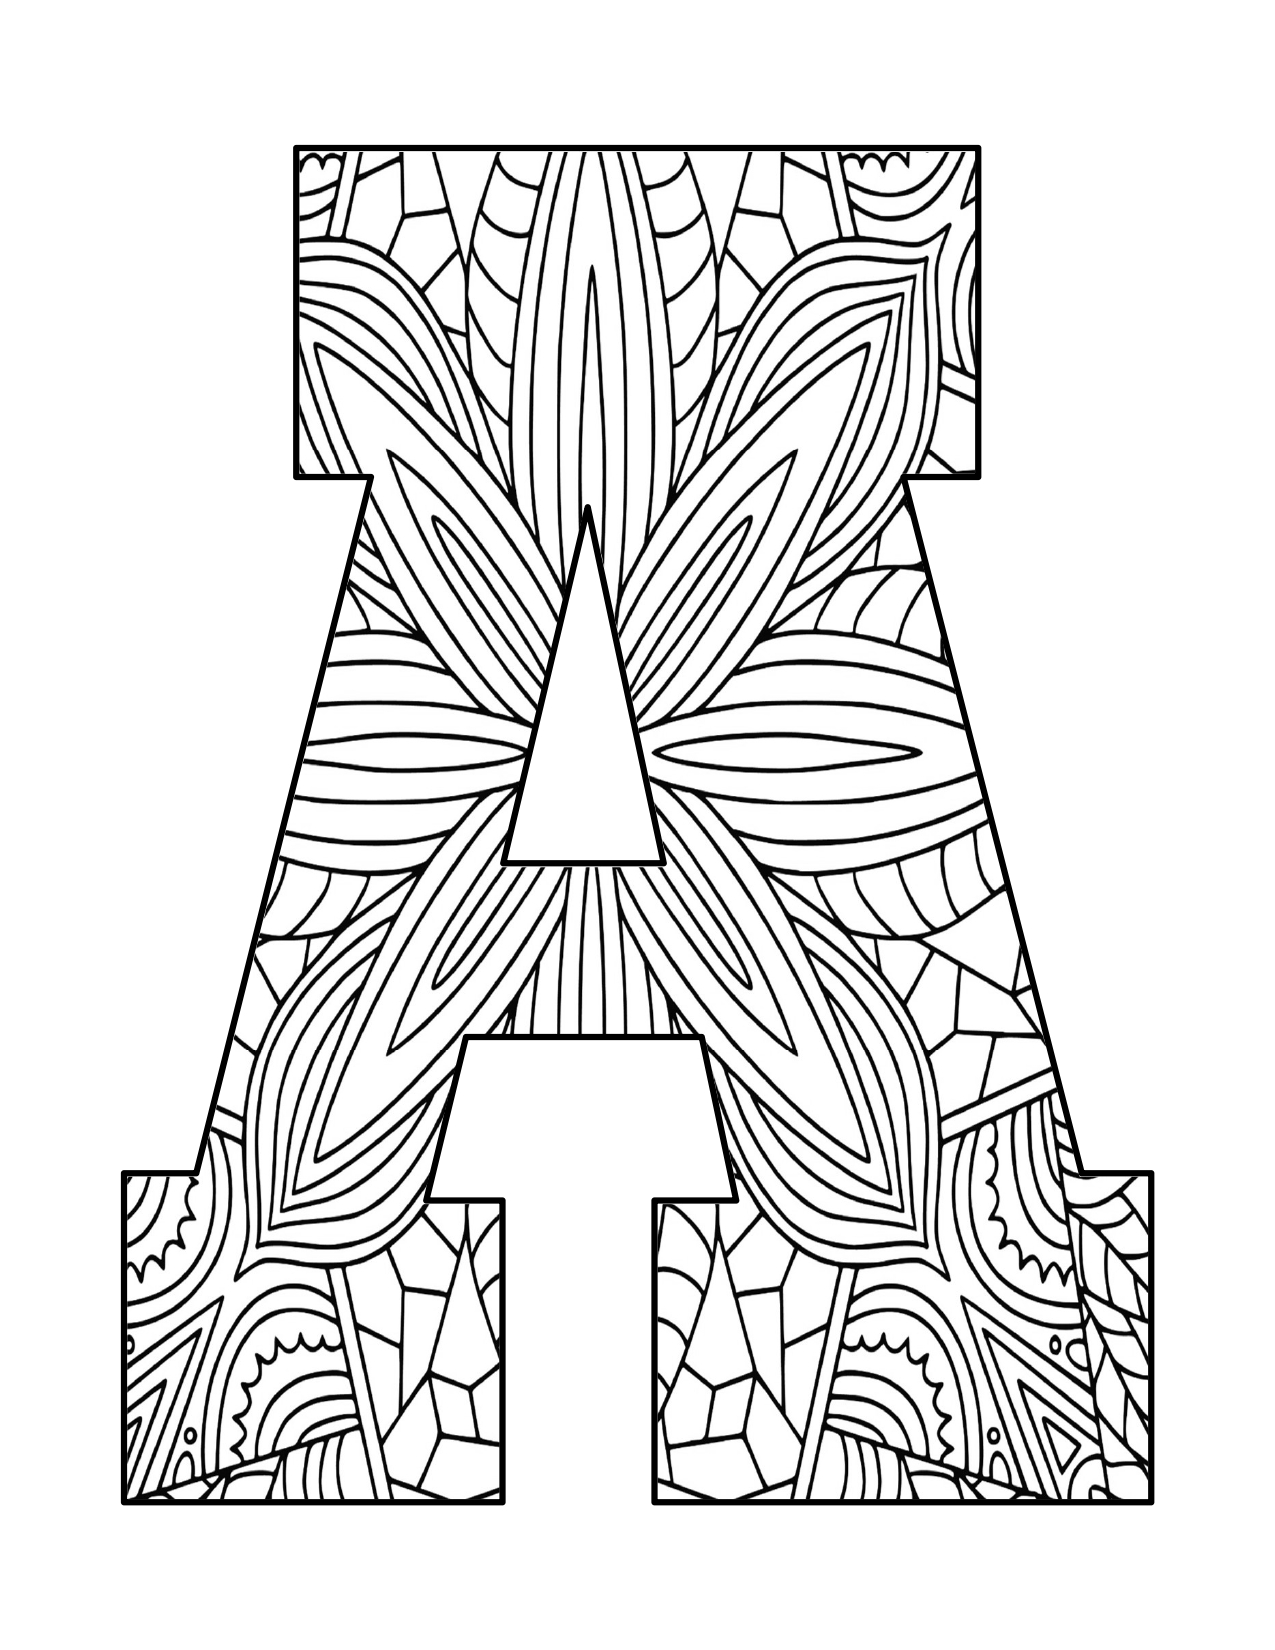 Mandala Alphabet Letters Coloring Pages. Instant Download for Printing